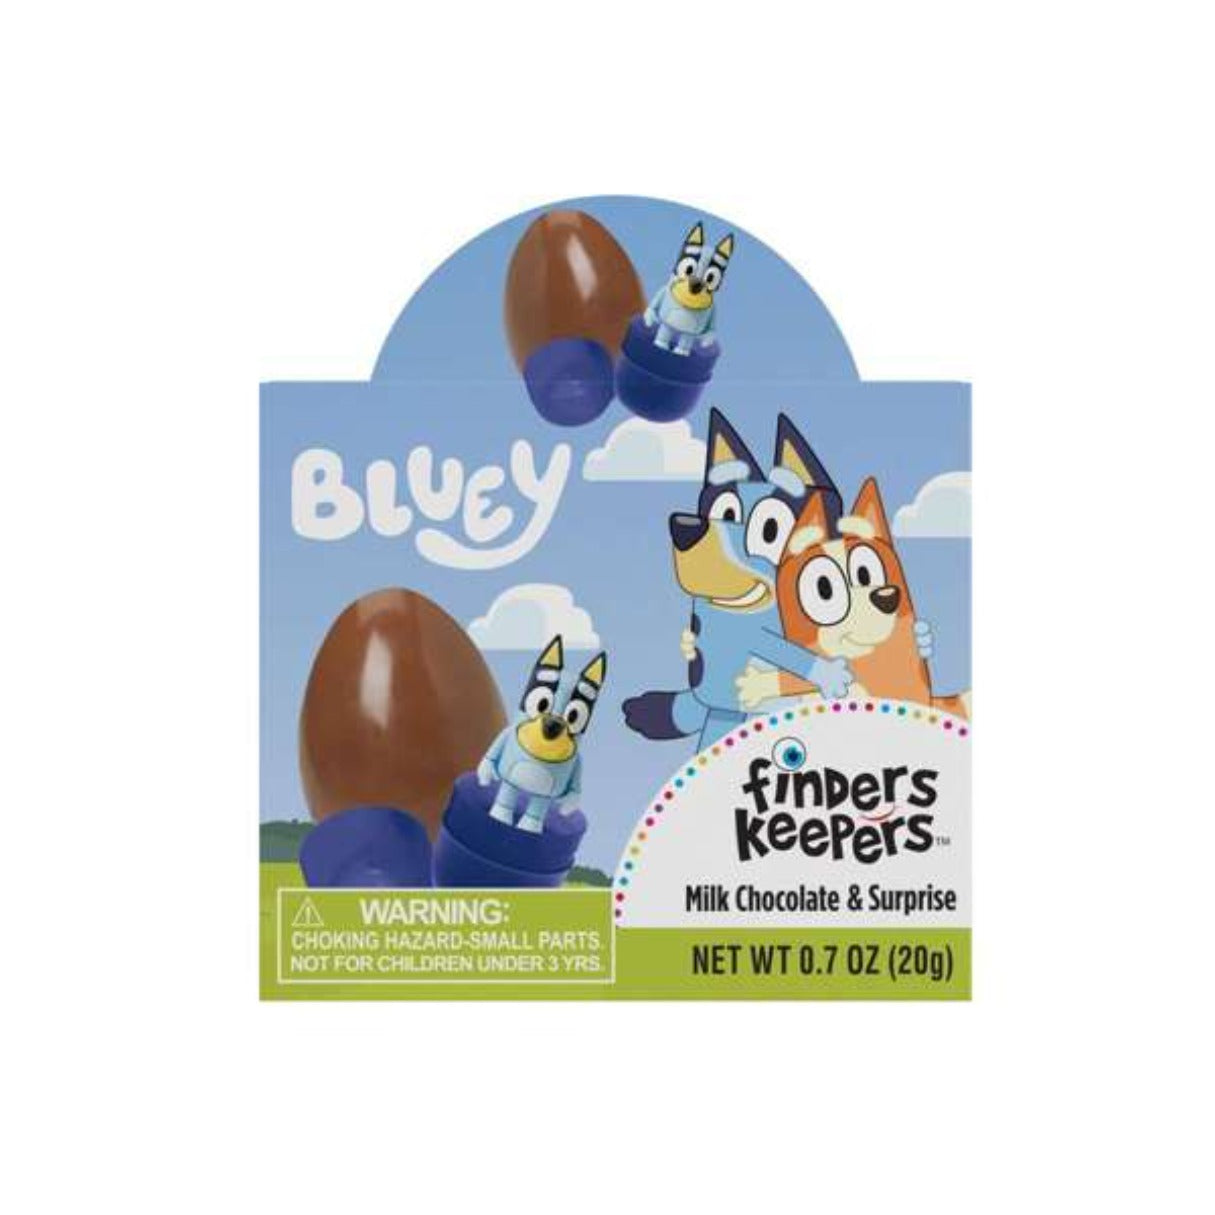 Galerie Finders Keepers Bluey Chocolate Box - 12ct